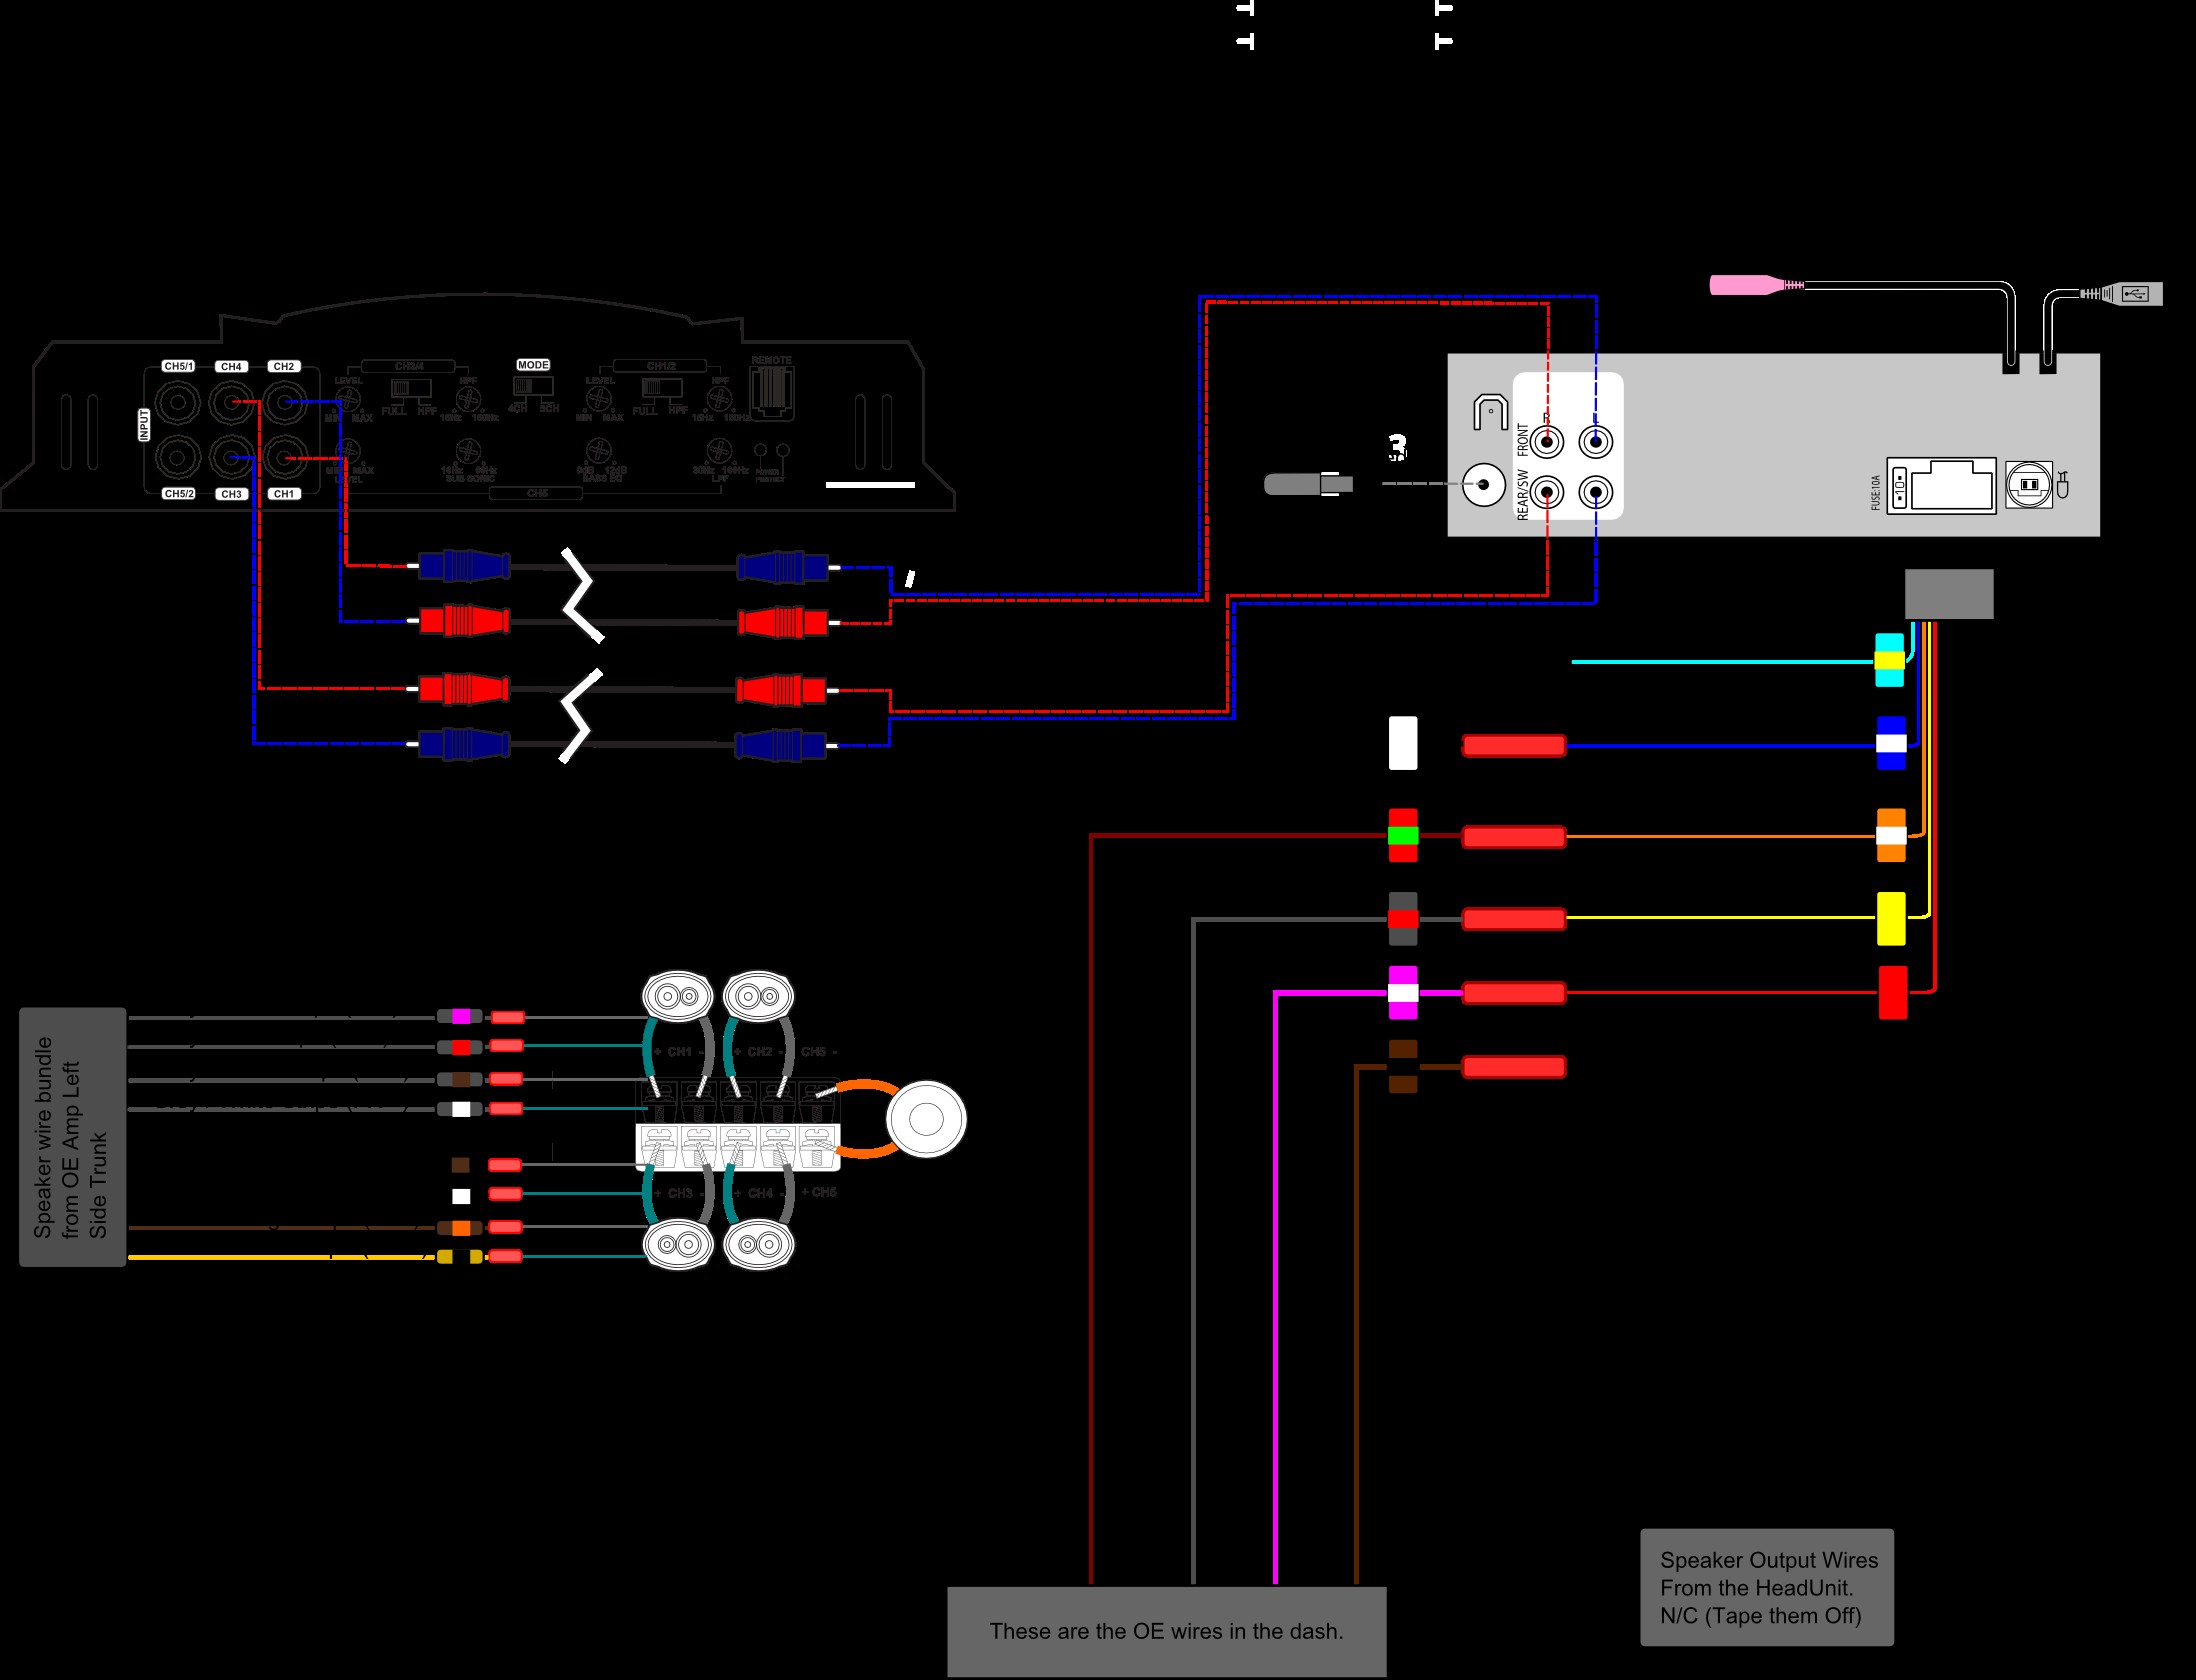 Car Stereo System Diagram Car Stereo Diagrams Speaker Wiring Ohms Diagram Car Stereo Wire Of Car Stereo System Diagram